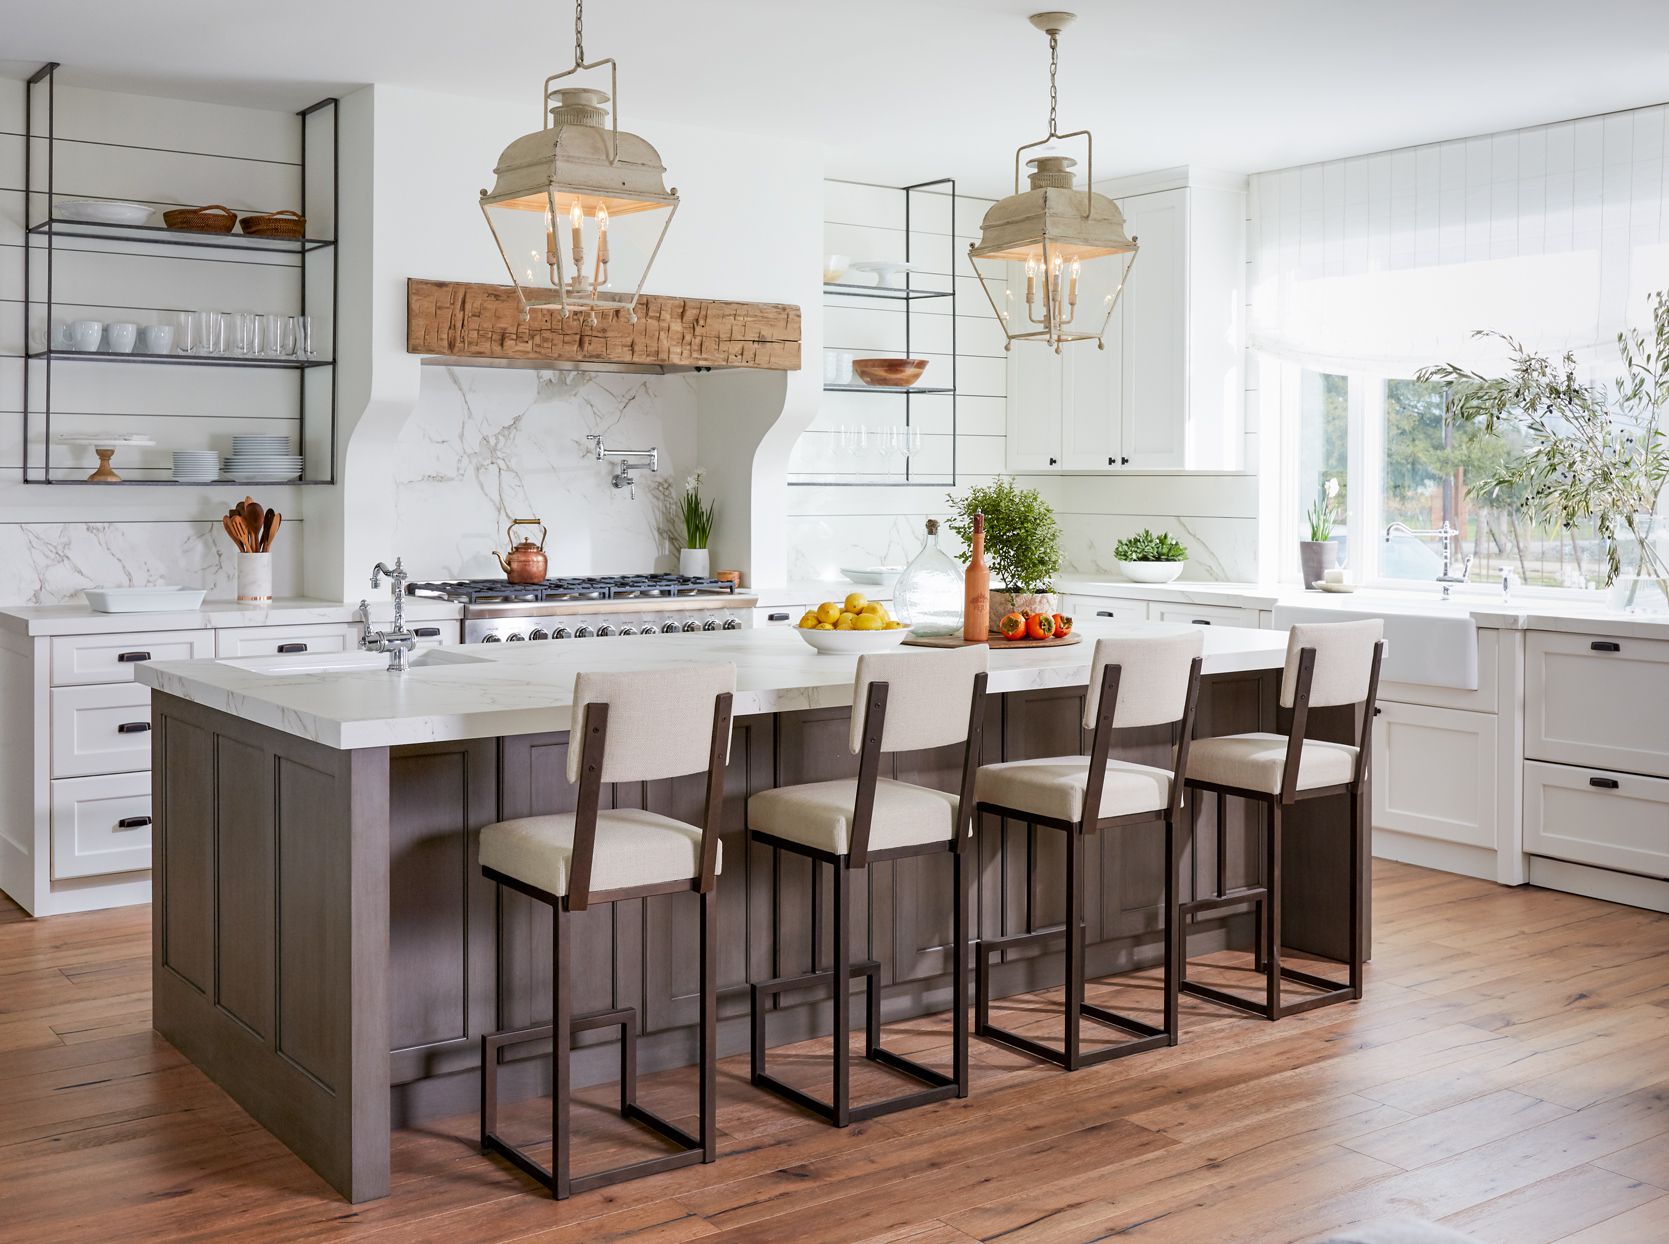 Kitchen Island Seating Ideas: 15 Ways To Create Comfort And Style